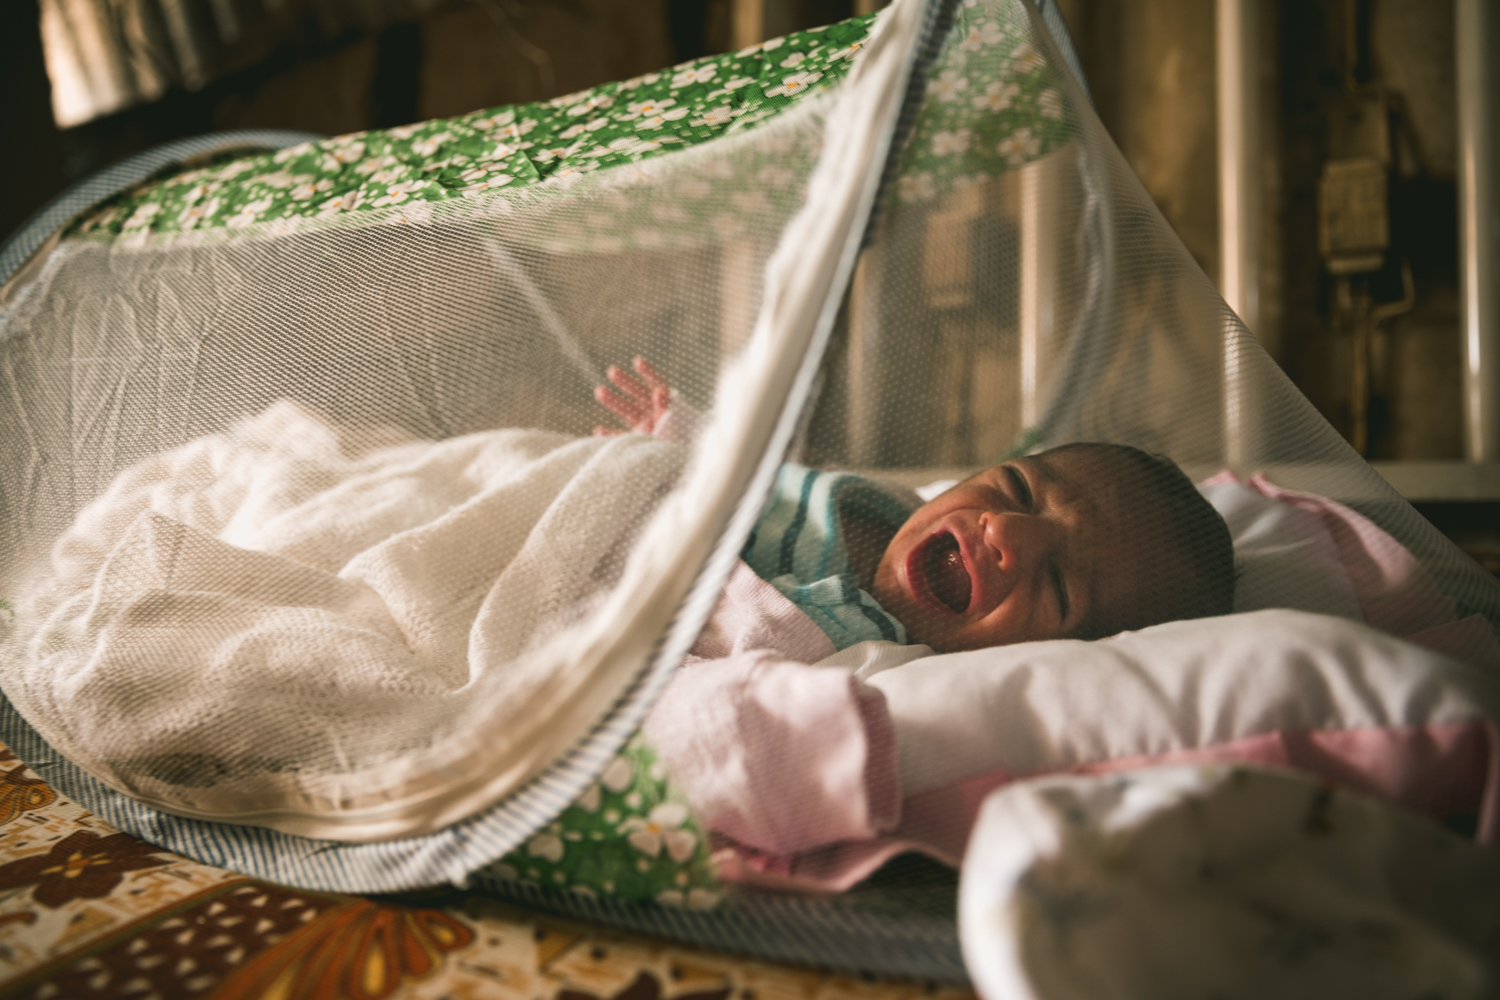  At the time of this photograph the infant was only five days old. A mosquito net protects her from insects. 